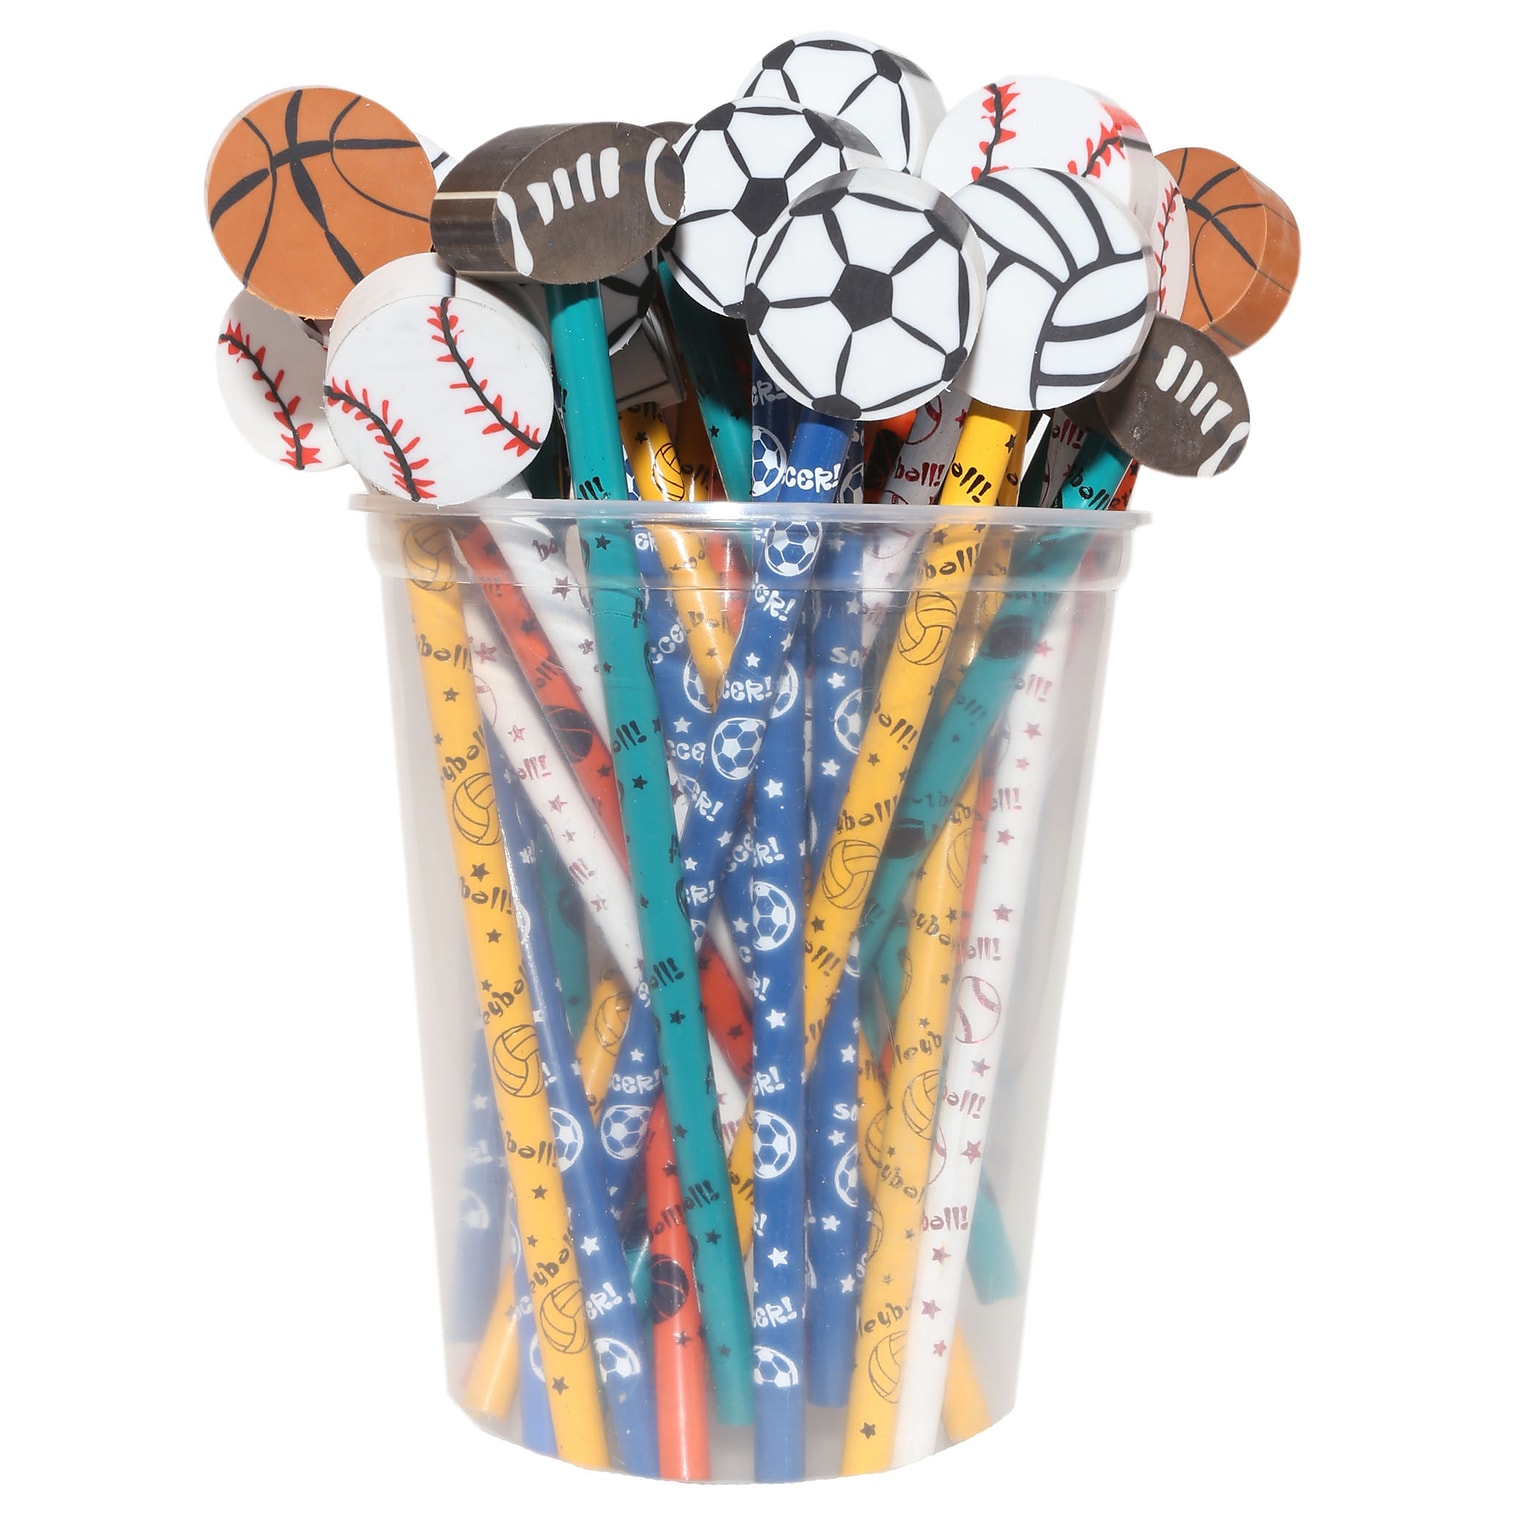 J.R. Moon Pencil Moon Pencil & Eraser Topper Write-Ons, Sports, Pack of 36 (JRM52960)